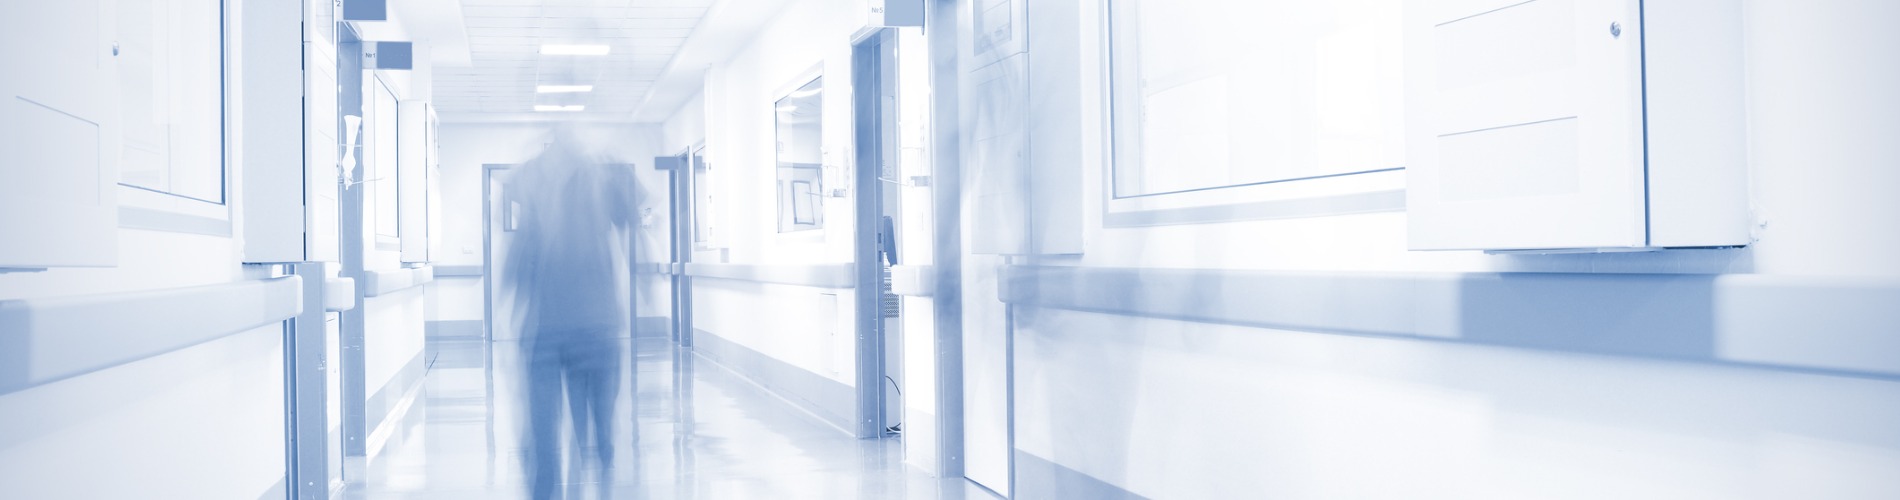 the-hospital-hall-picture 1900 x 500